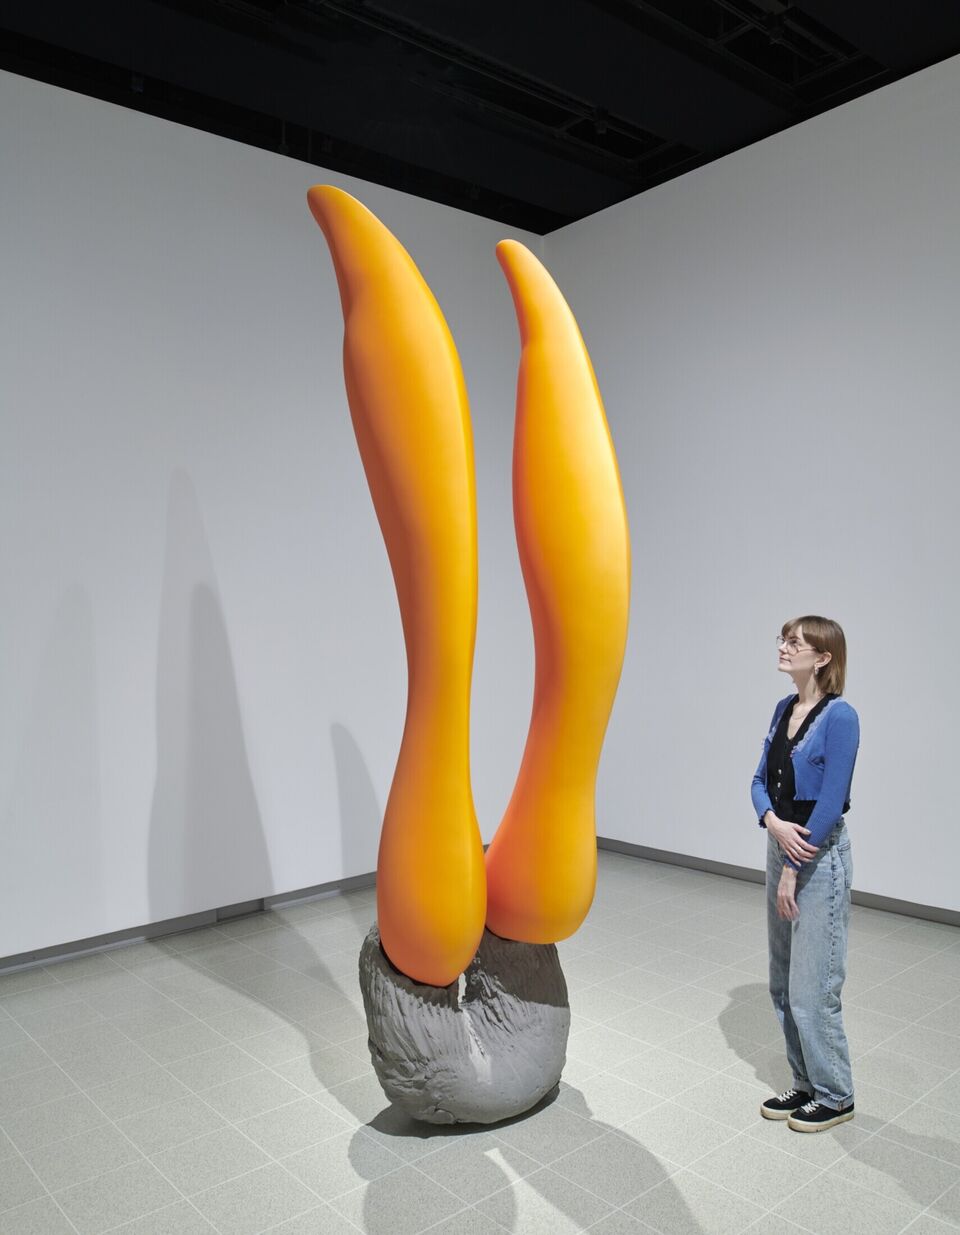 A woman looks at a tall orange and grey art installation  in a gallery